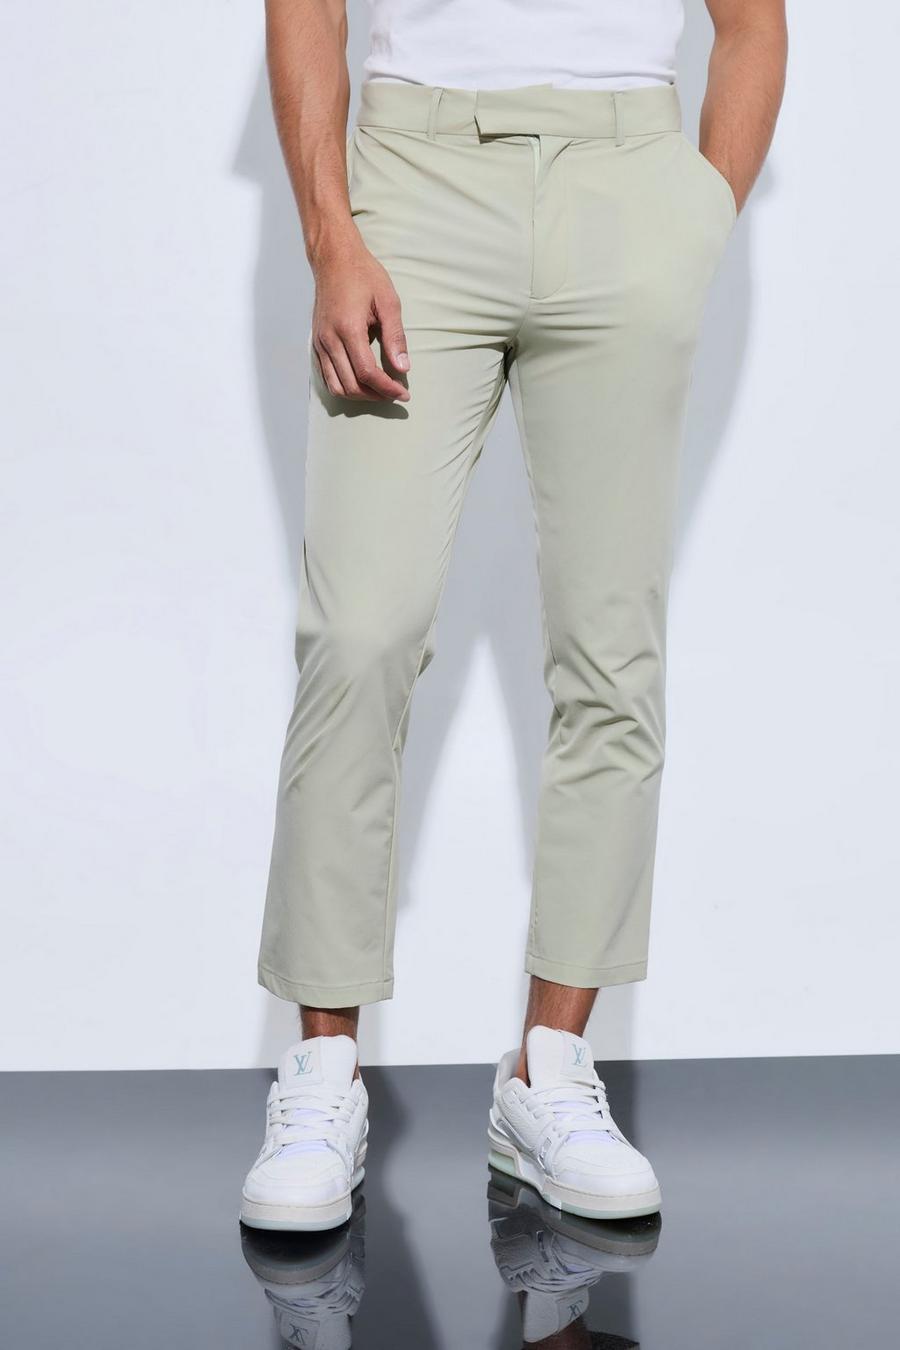 Men's Cropped Trousers, Skinny & Slim Fit Cropped Trousers